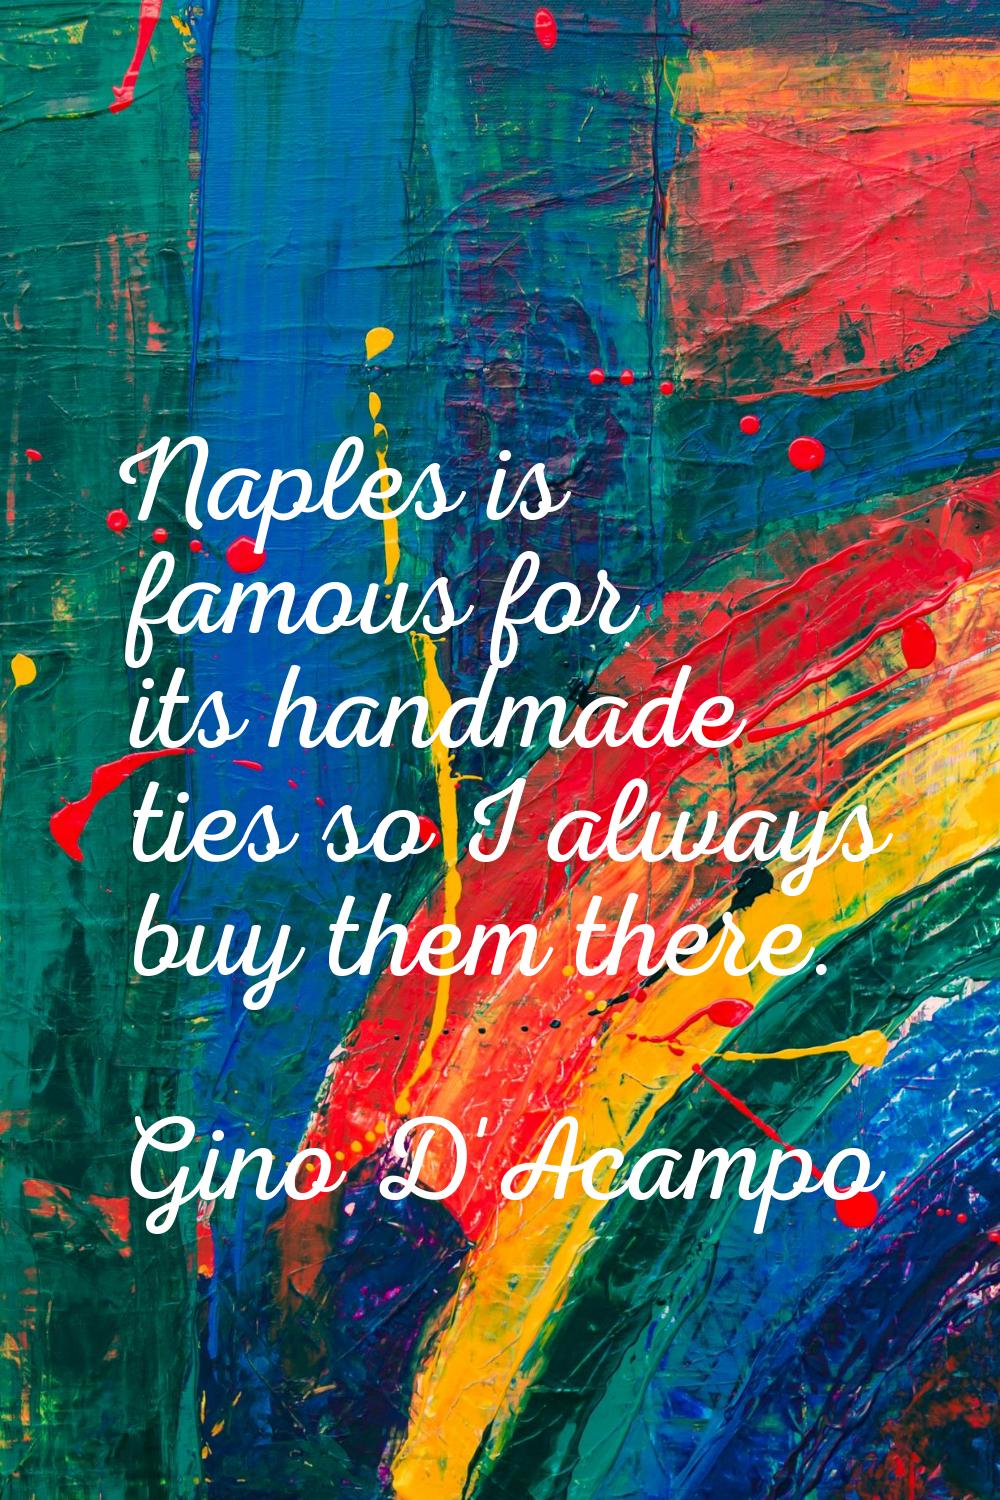 Naples is famous for its handmade ties so I always buy them there.